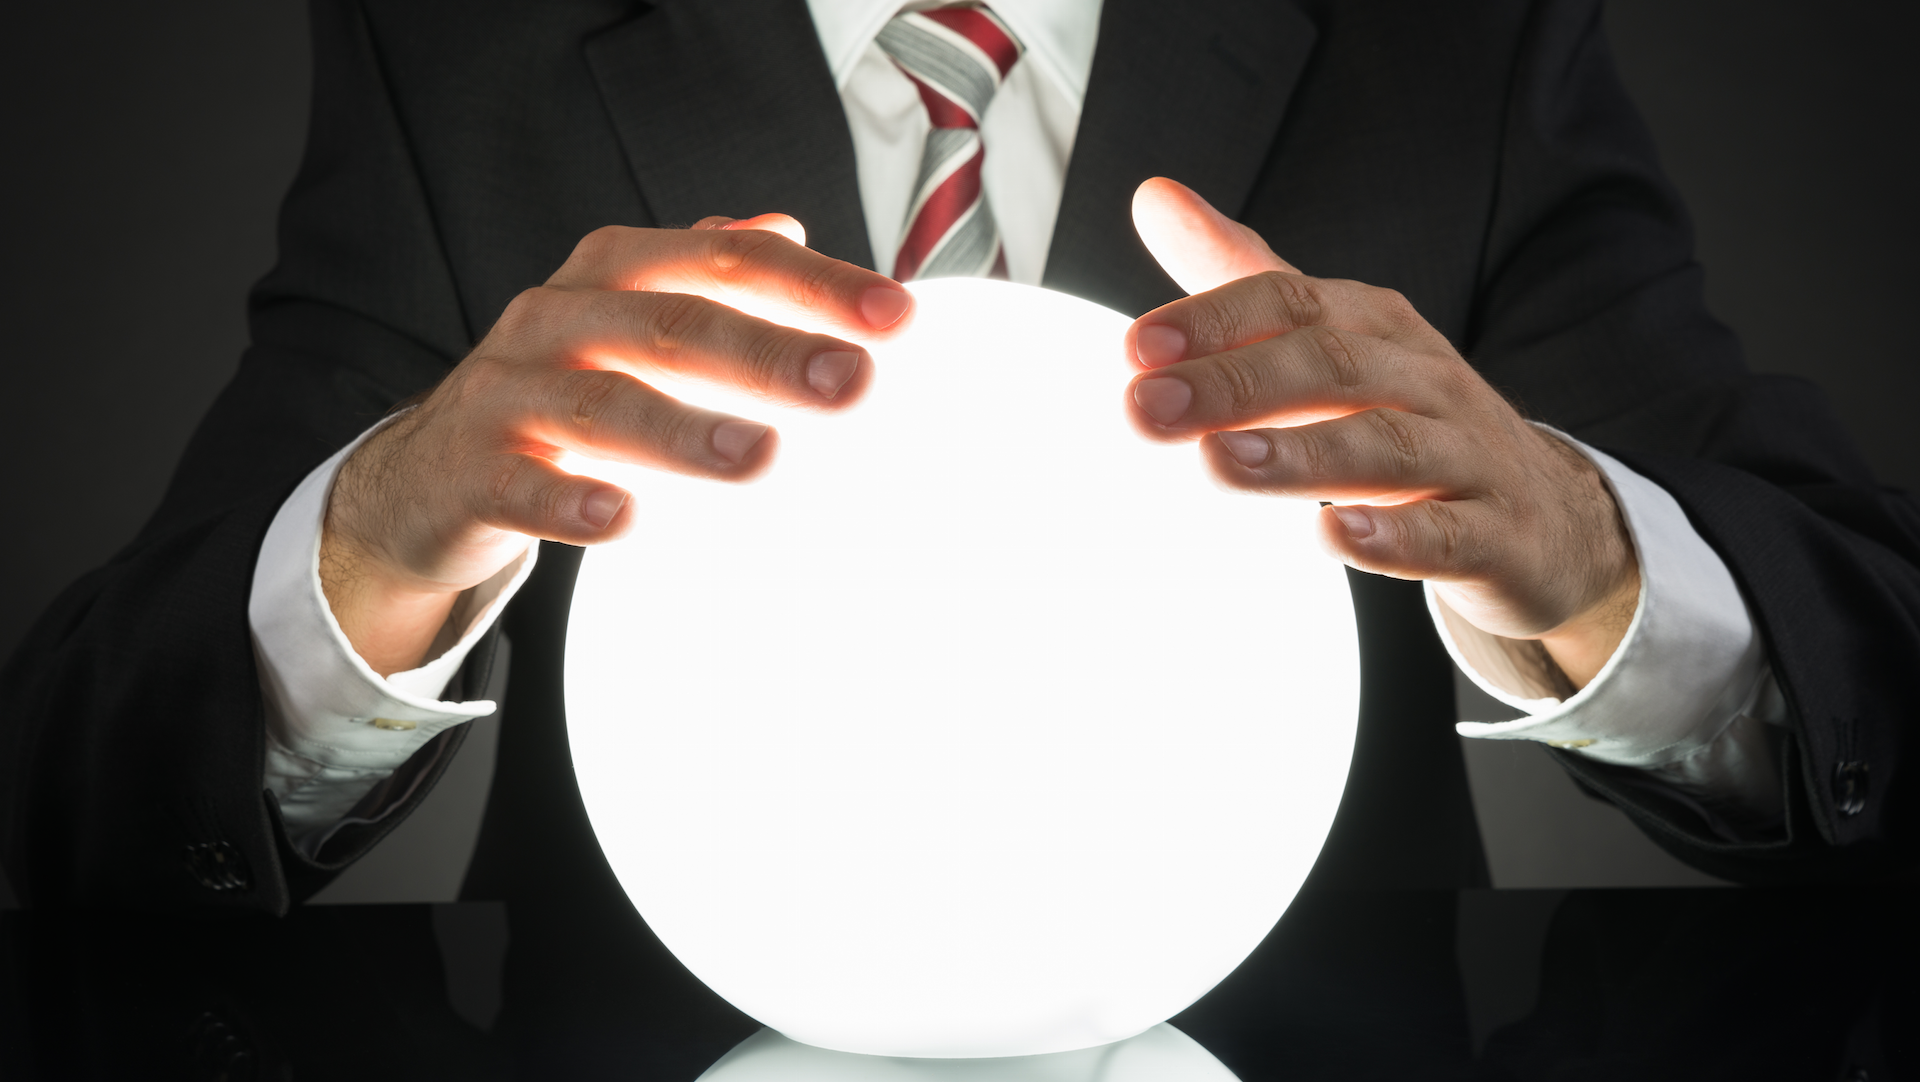 A six-pack of predictions for martech - crystal ball